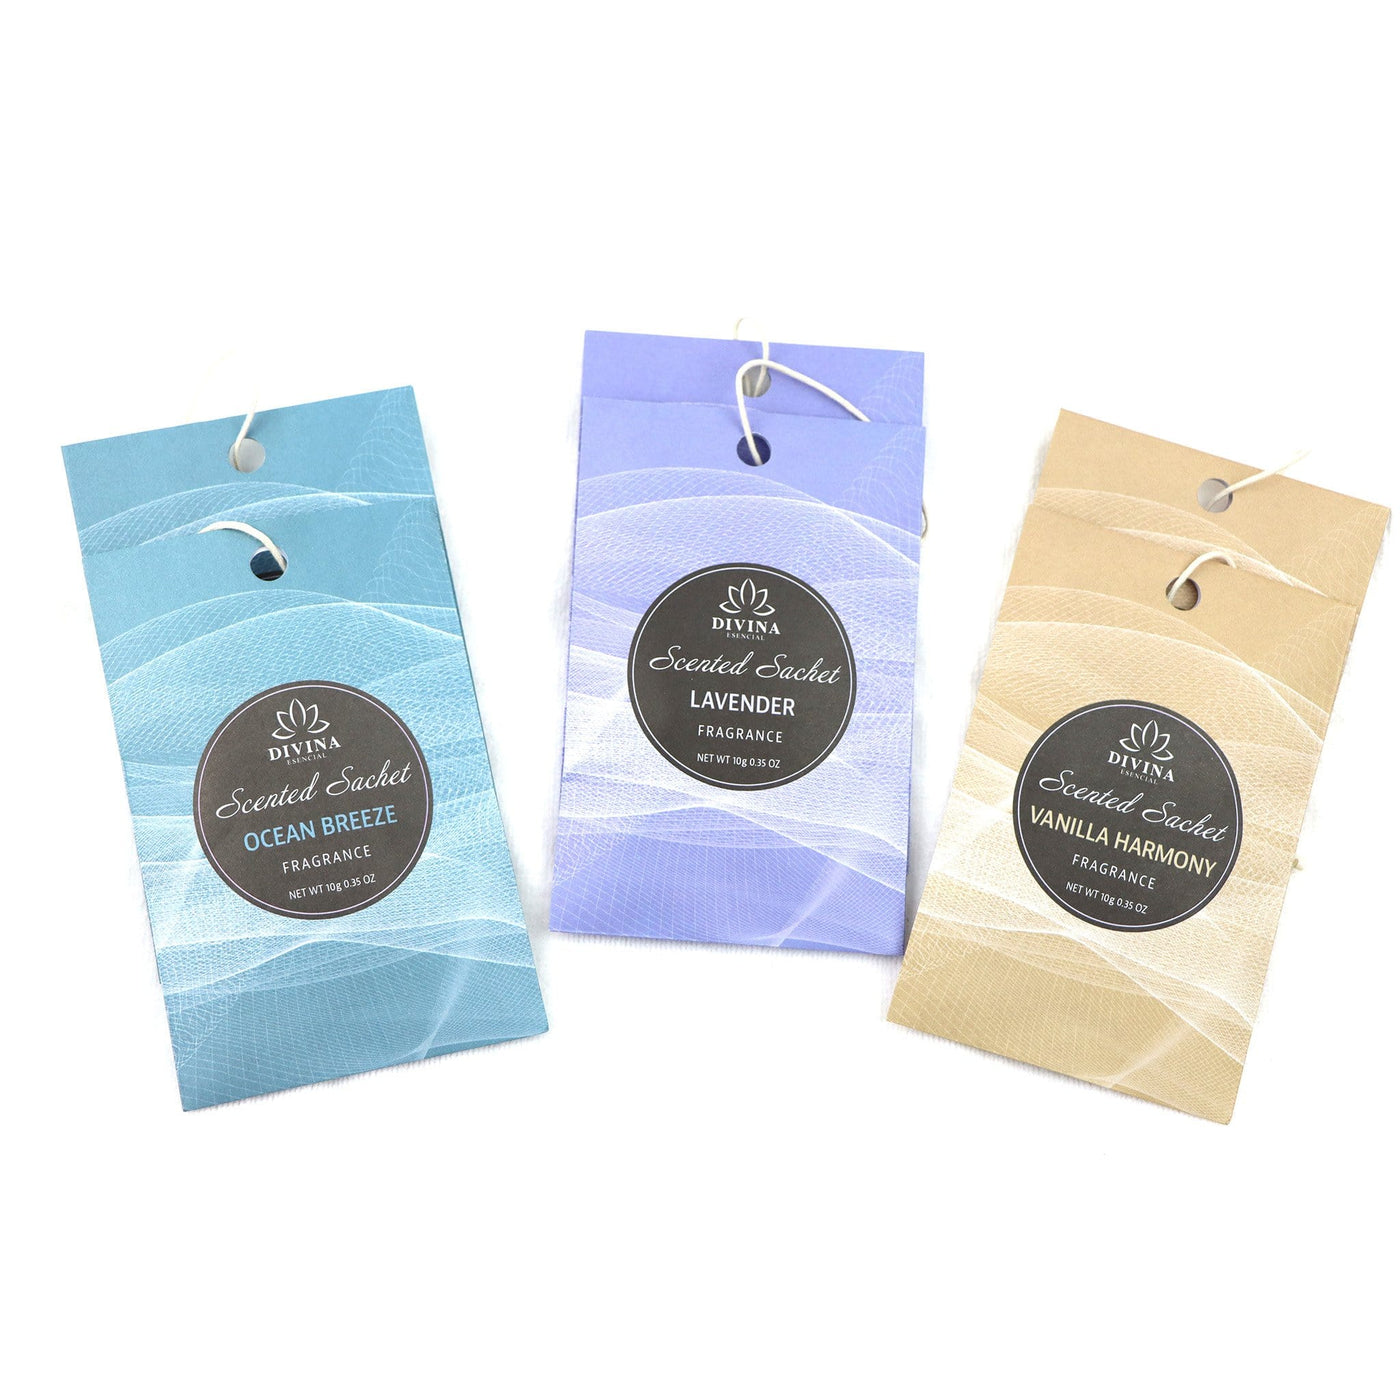 Scented Sachet - Assorted 6 count